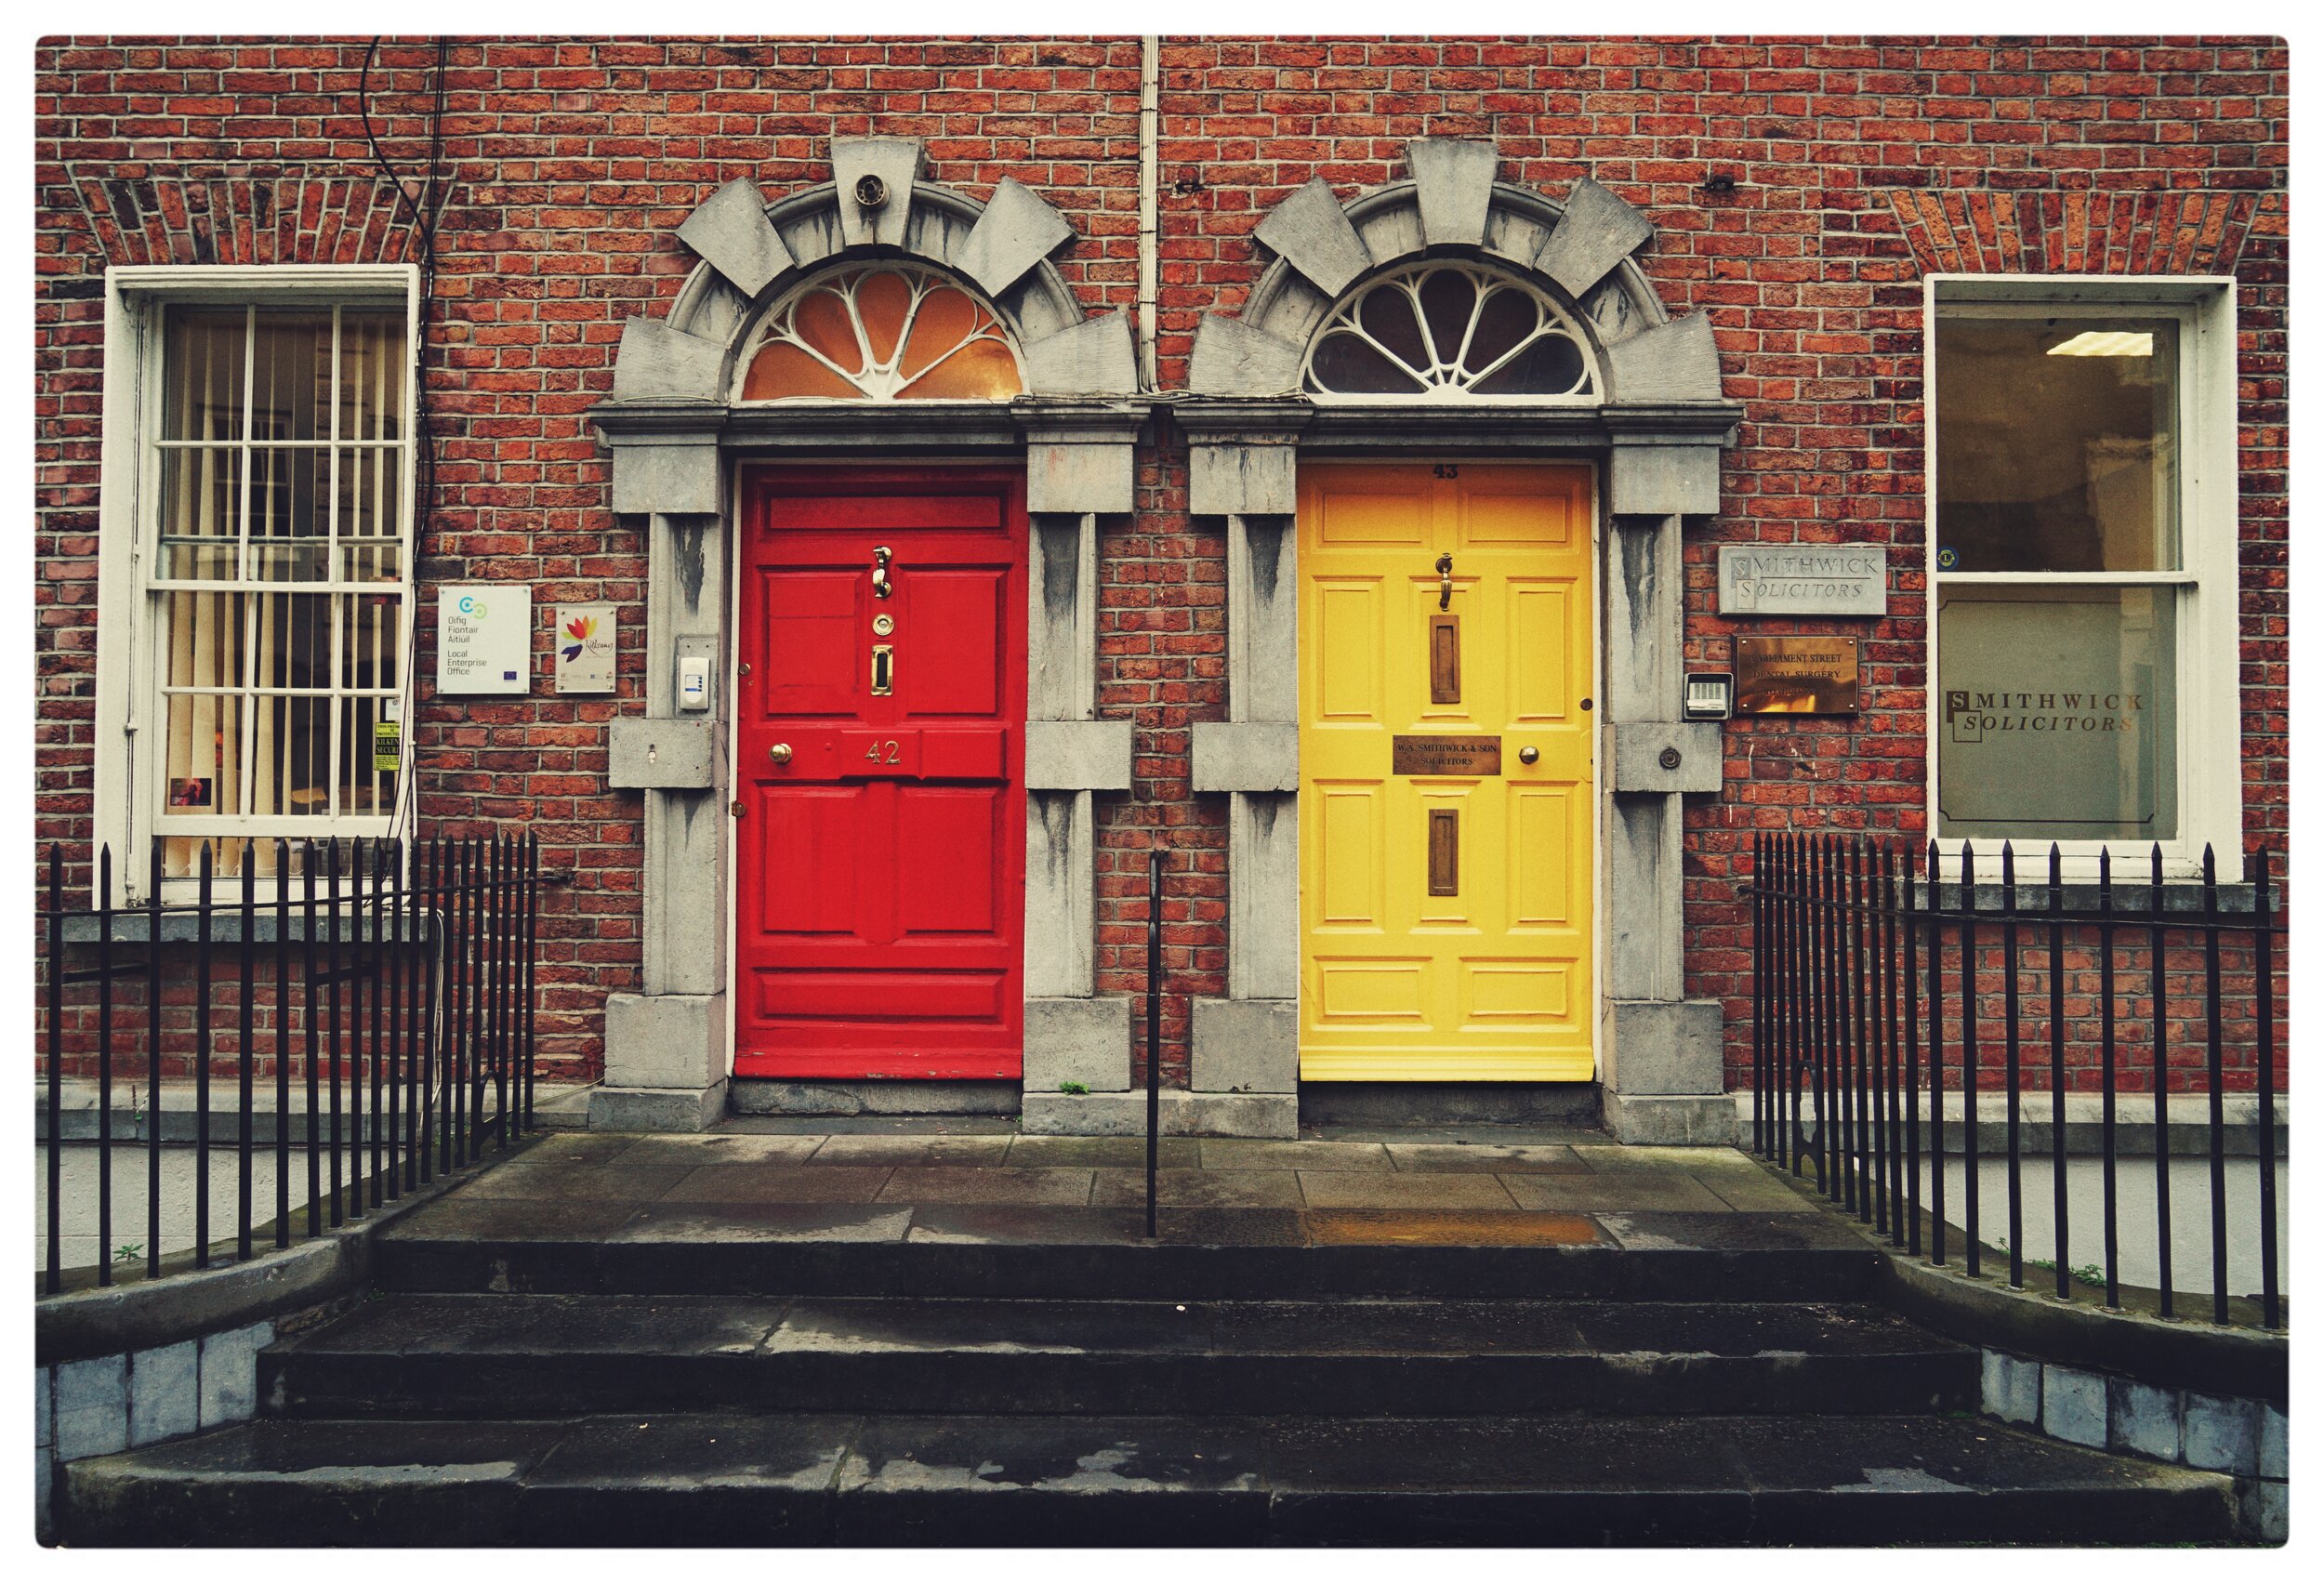  Find and photograph all of Dublin’s famous colorful doorways 